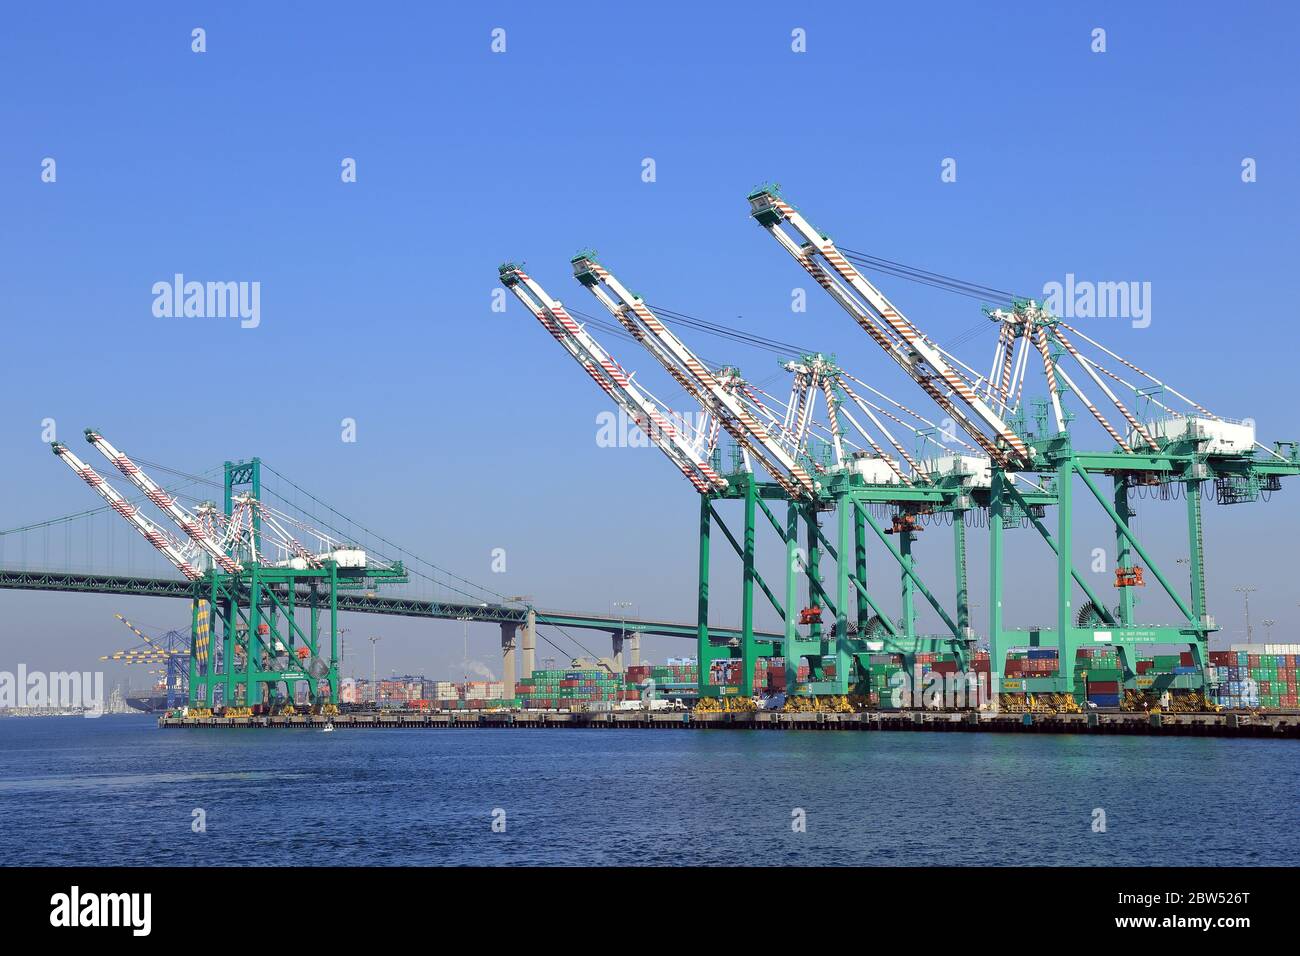 Giant gantry cranes at Long Beach container terminal Stock Photo